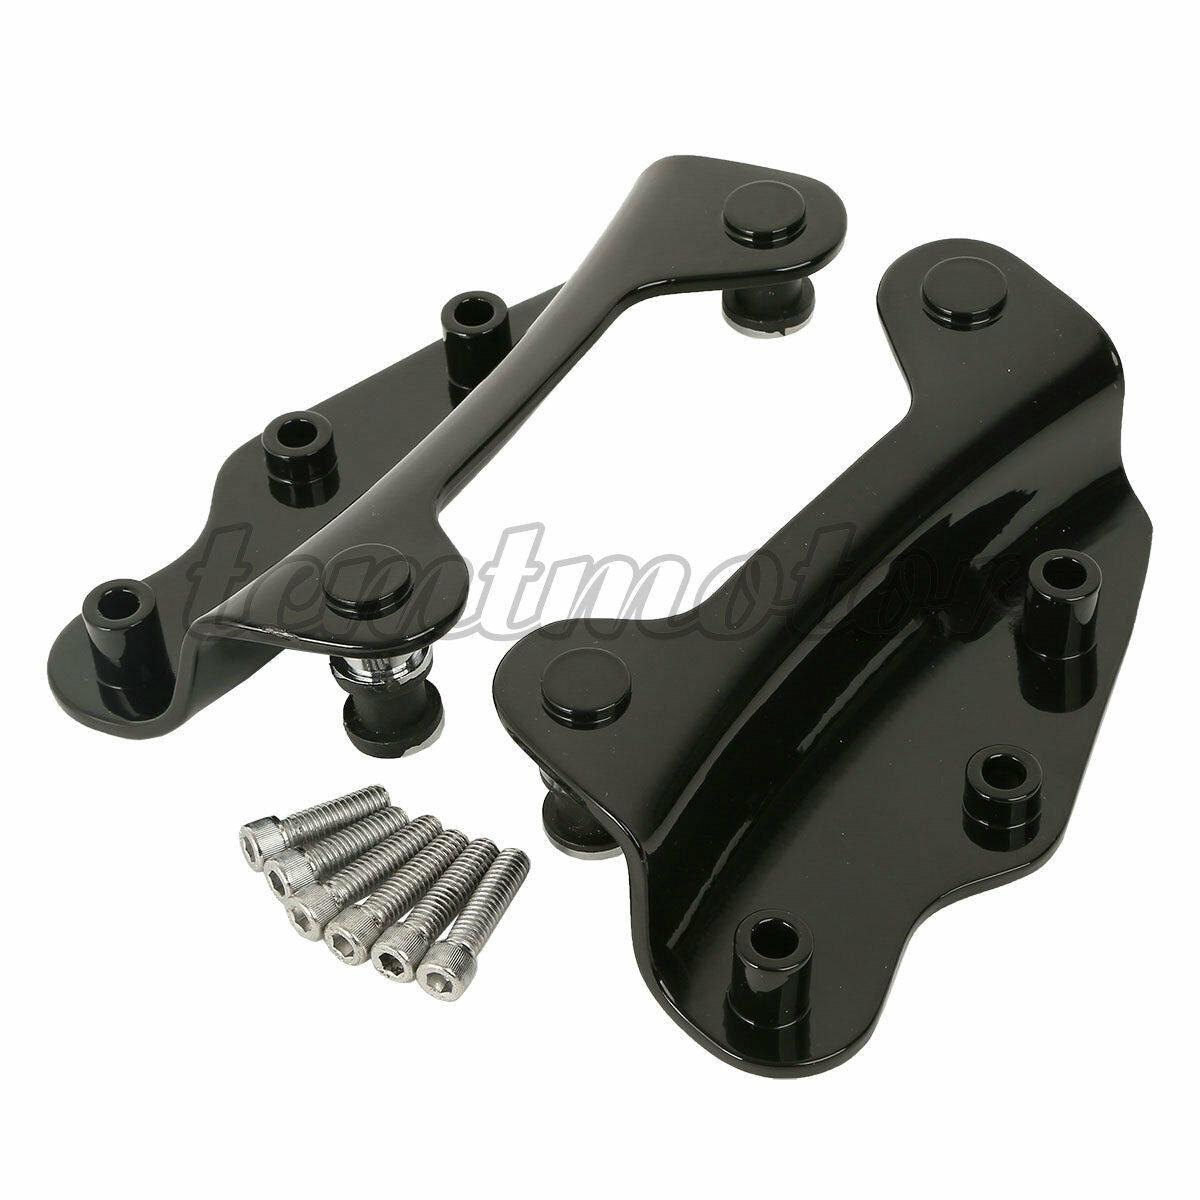 4 Point Docking Hardware Kit Fit For Harley CVO Road King Street Glide 2009-2013 - Moto Life Products